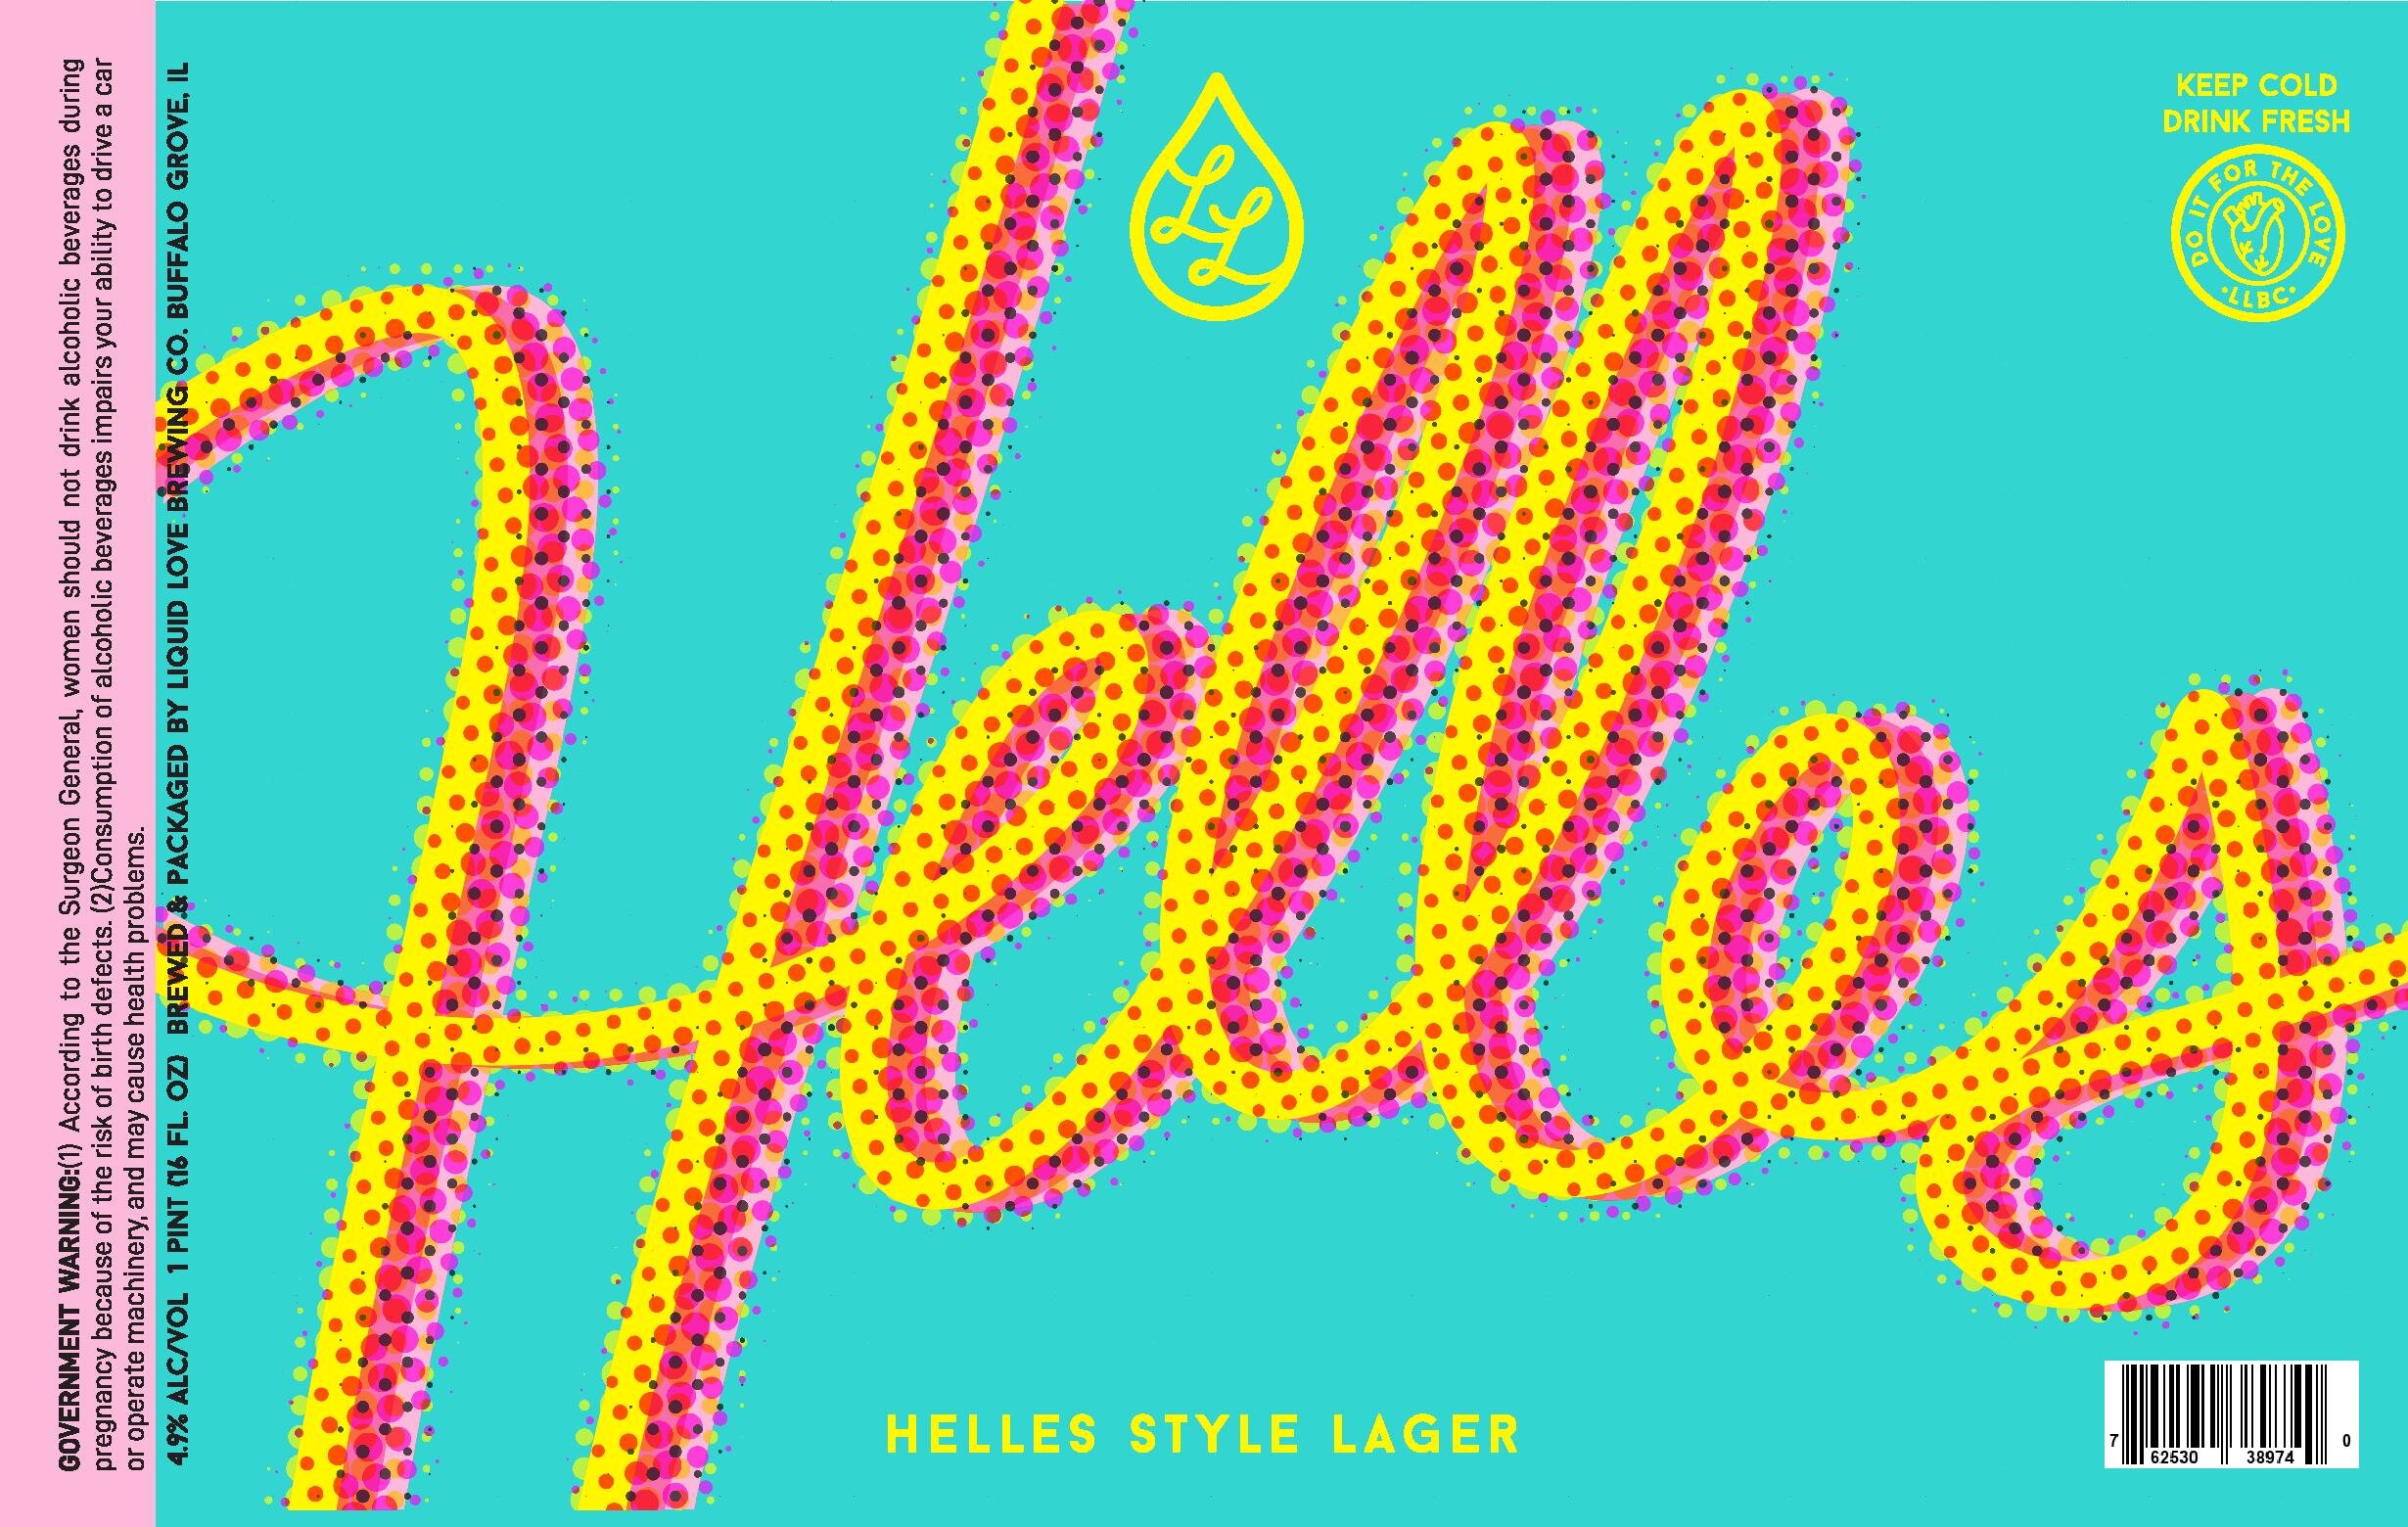 Helles - Lager